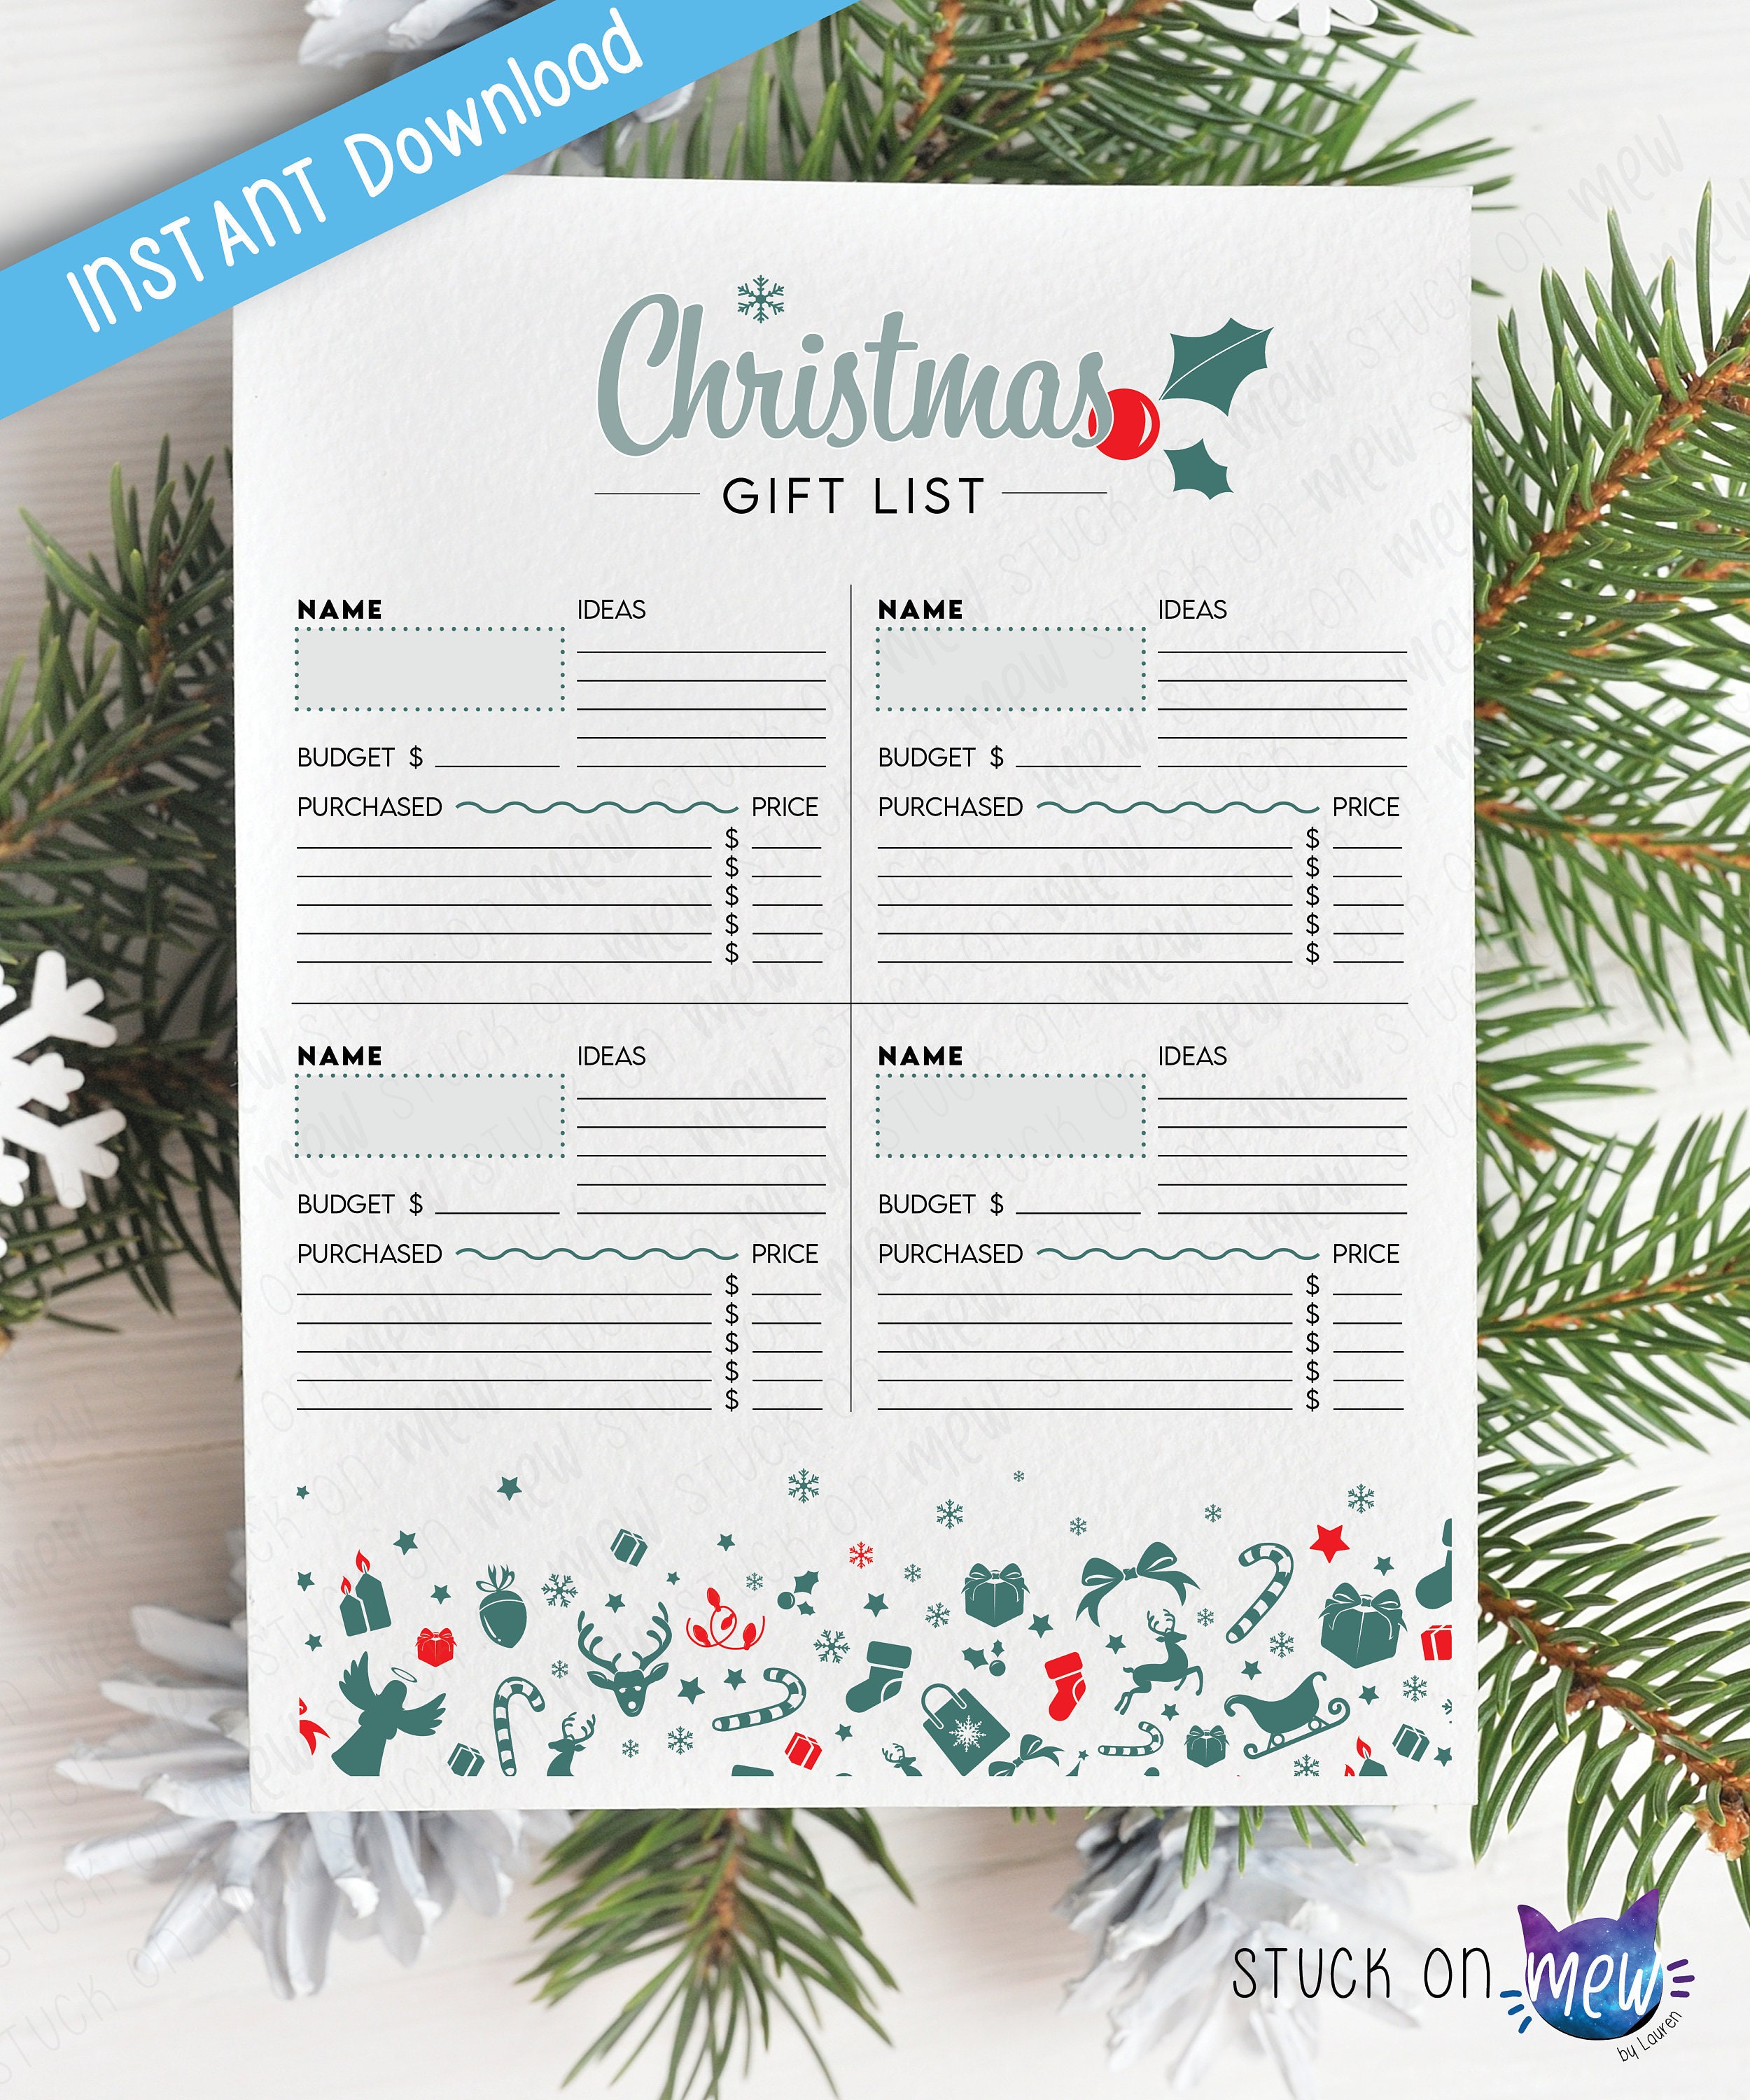 Aesthetic Christmas Wishlist Ideas for Every Style and Budget